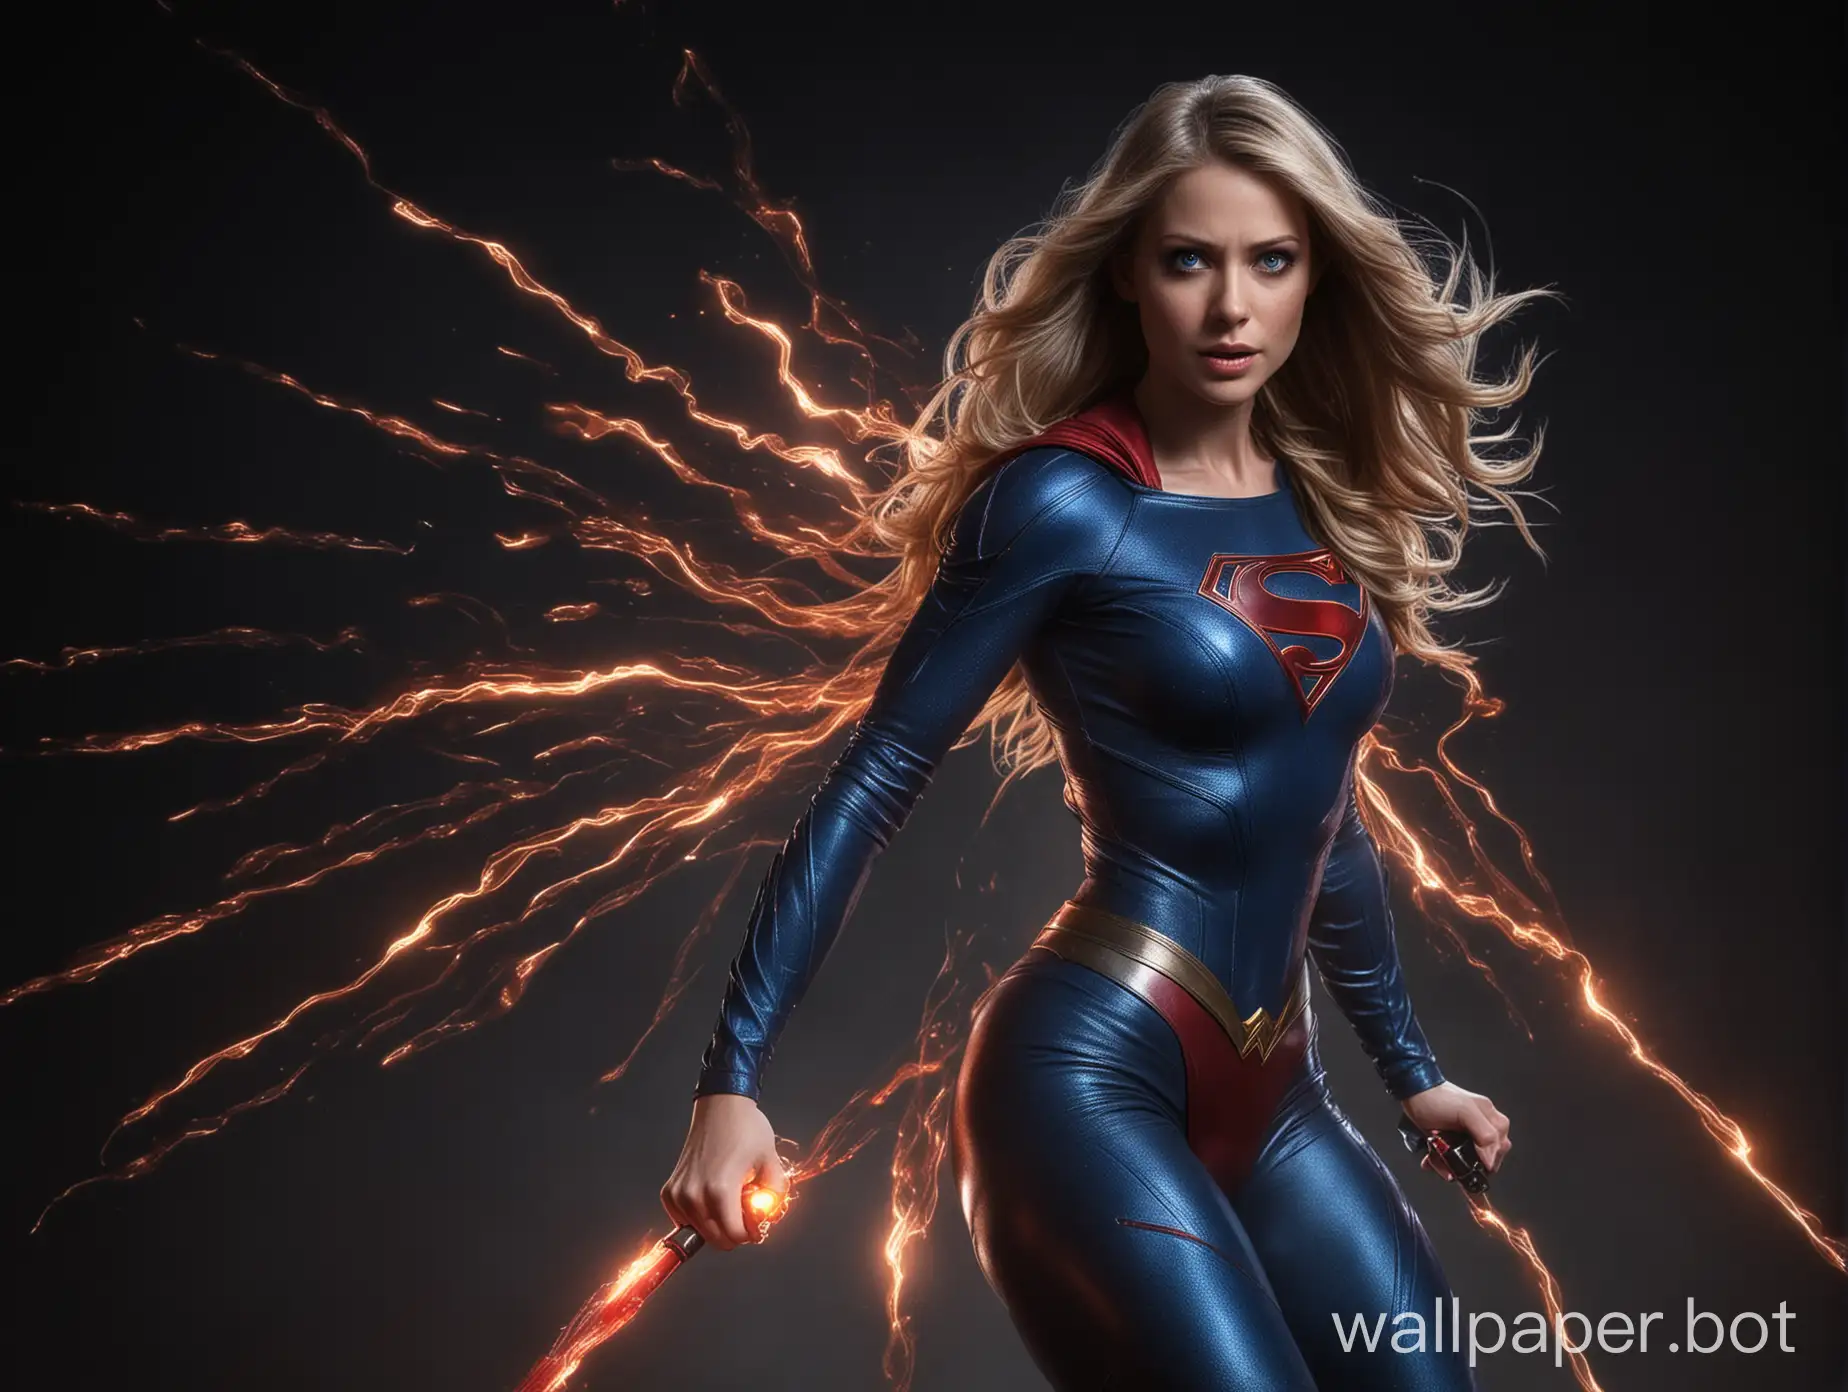 supergirl in latex body shoots lasers from eyes, long hair, hair on fire, bright blue eyes, dark background, full length